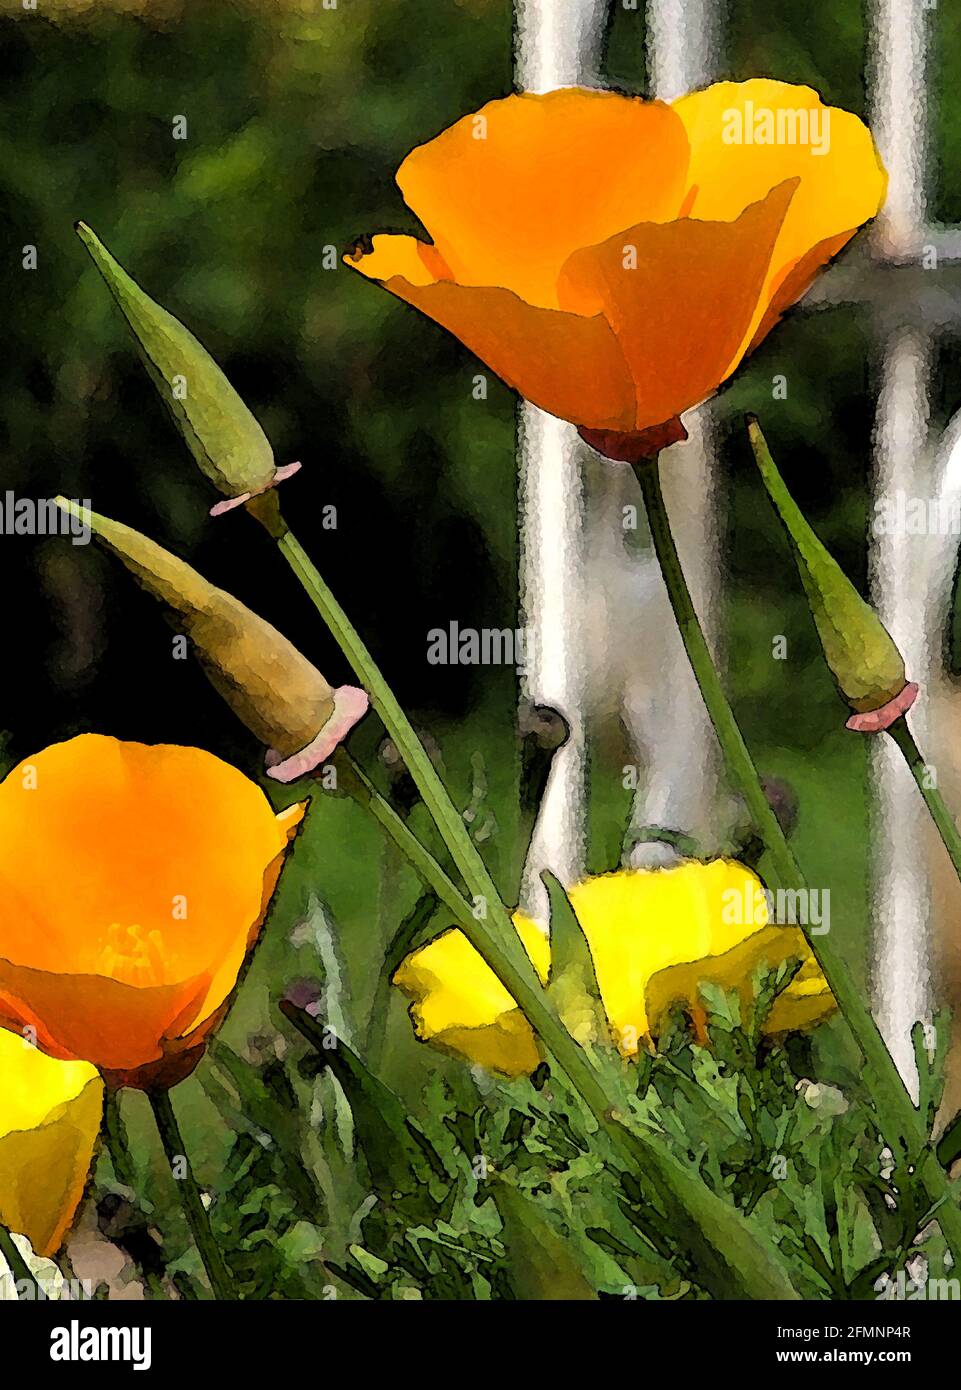 California Poppies (Eschscholzia californica) One of Forty-two Iconic Images of English Garden Flowers, Wildflowers and Rural Landscapes. Stock Photo